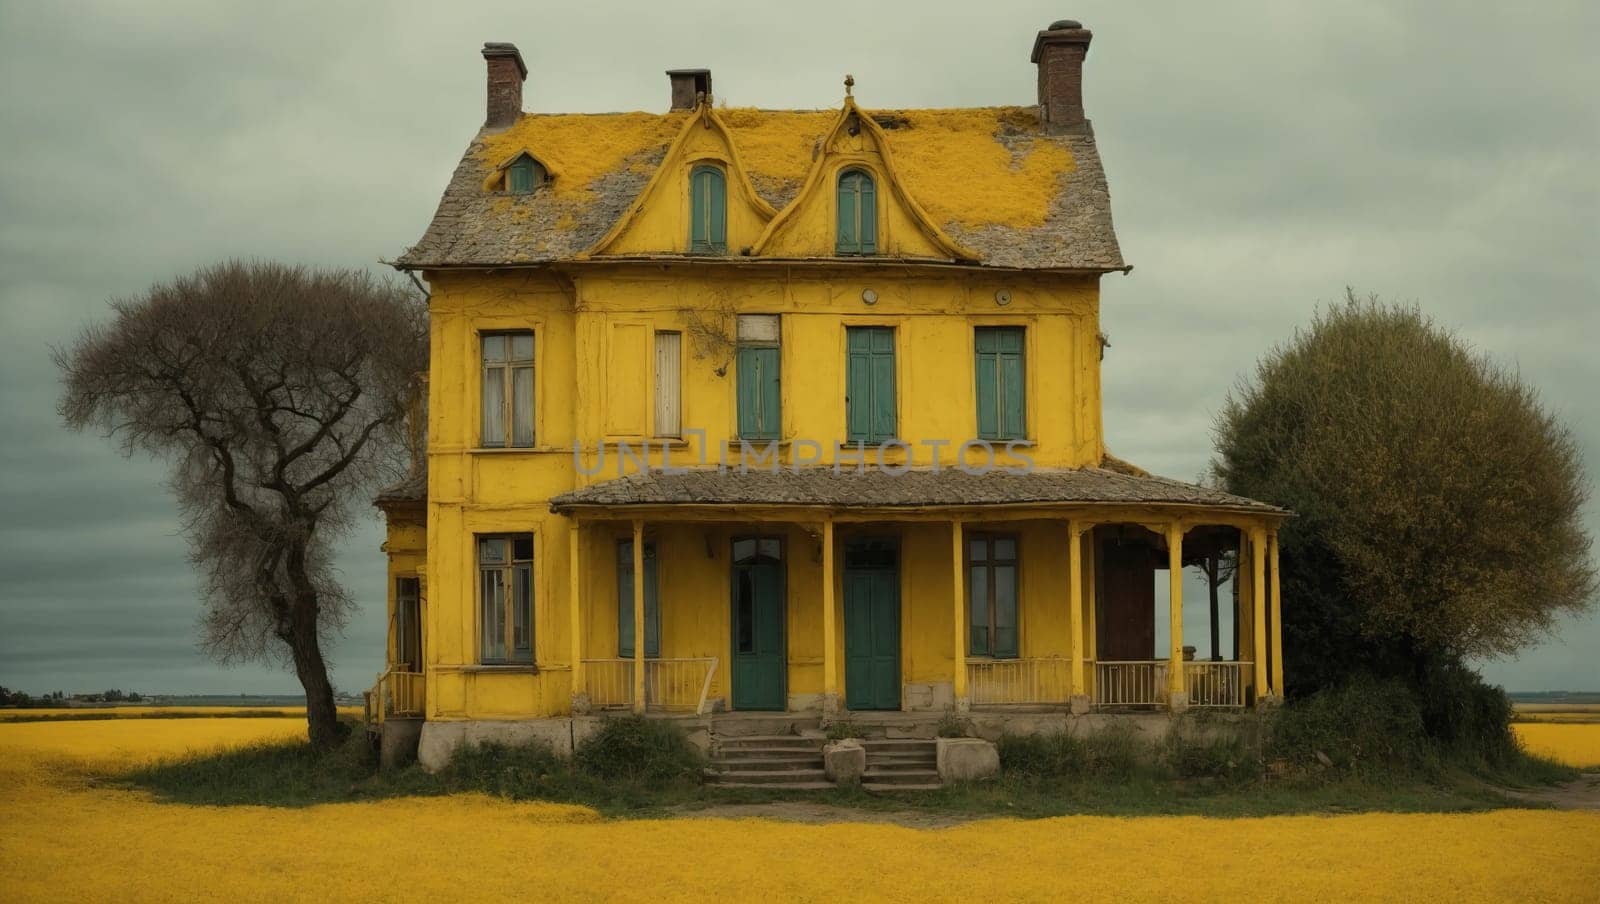 The Yellow House by applesstock